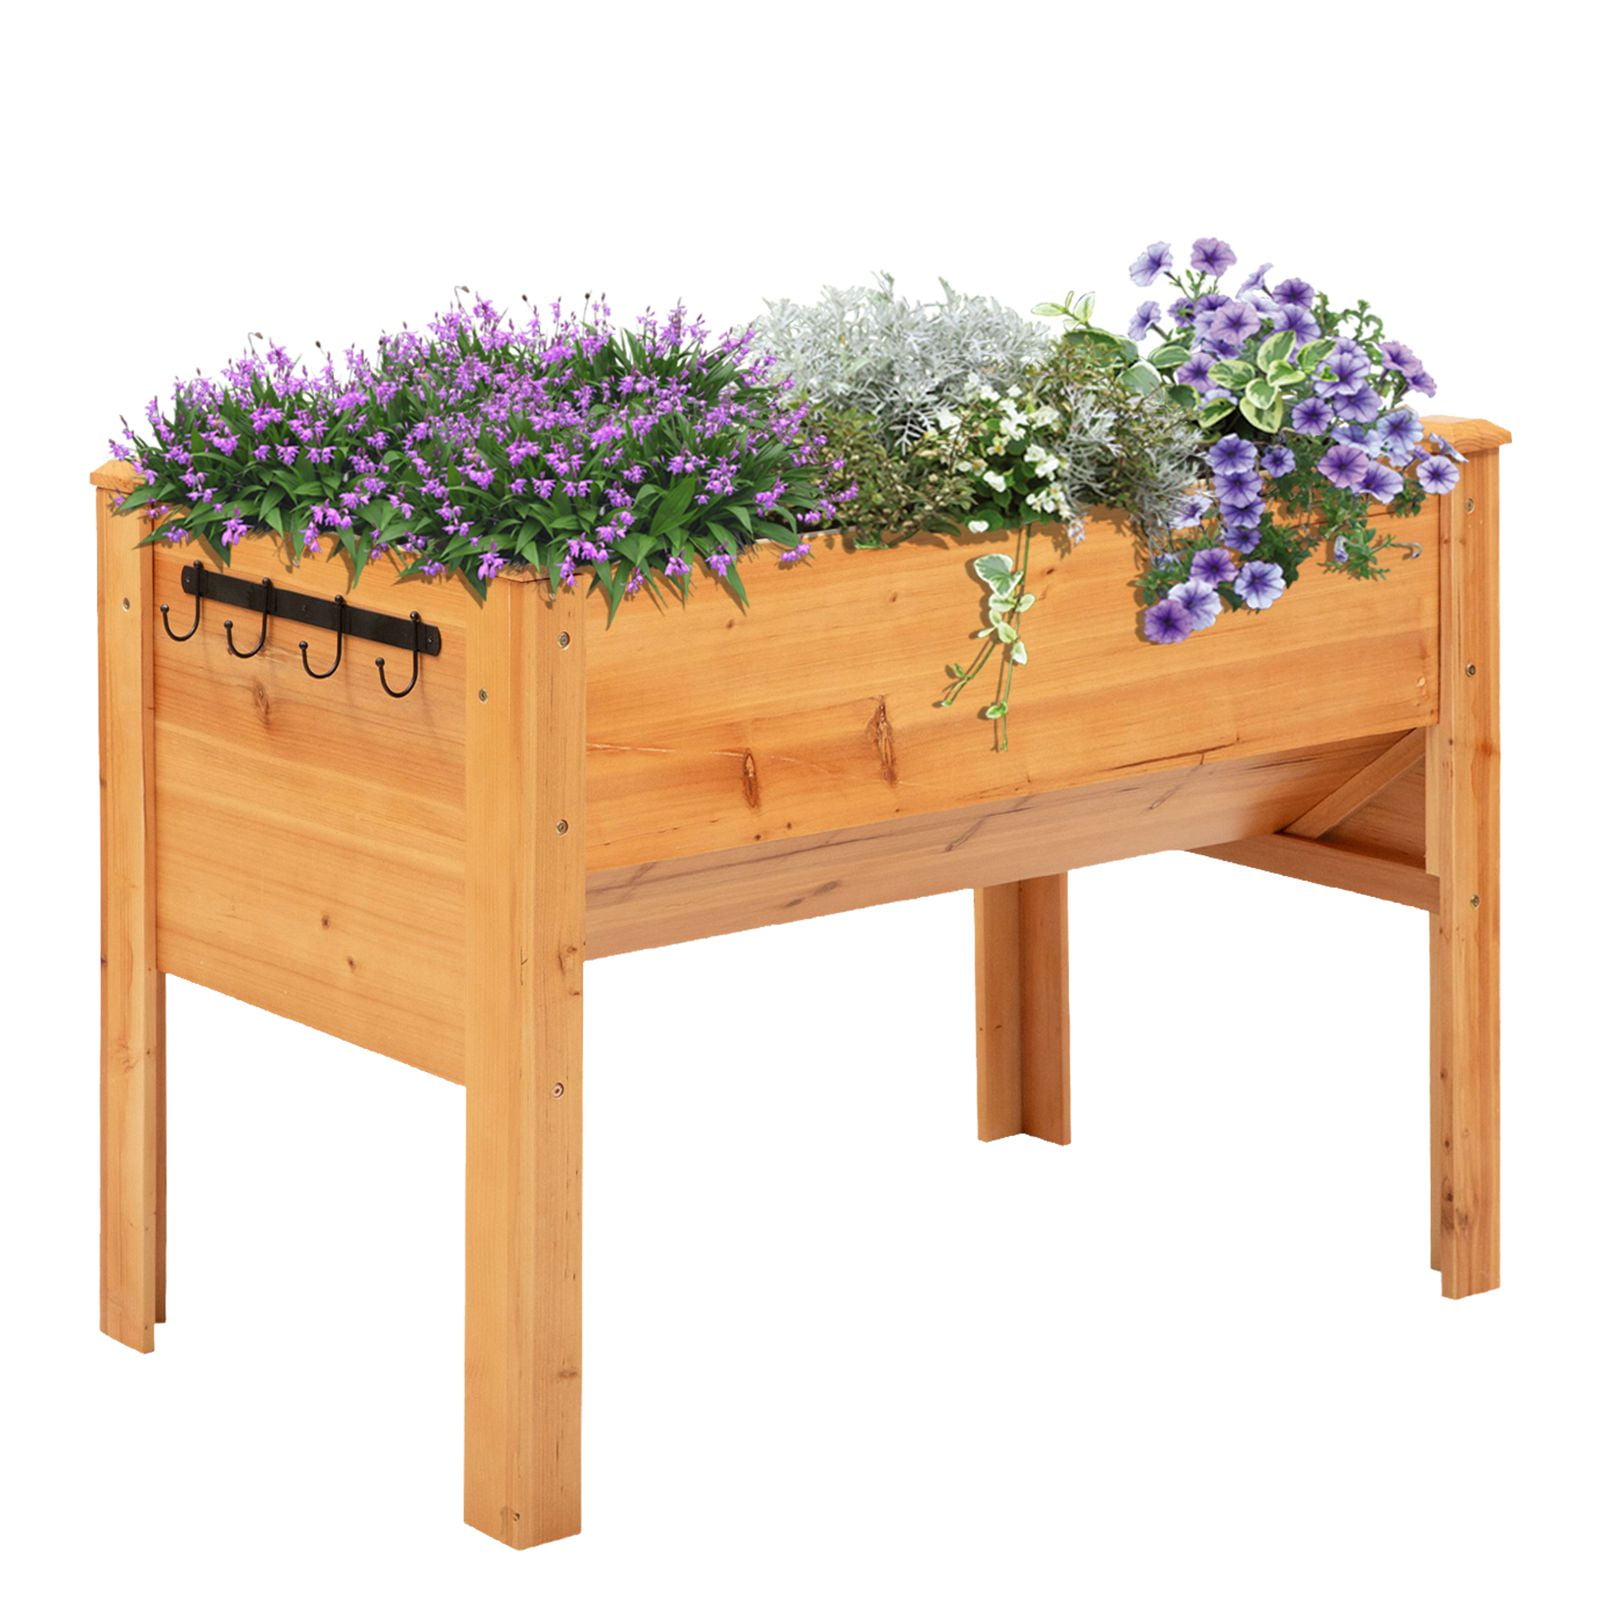 Details about   Outsunny 4' x 2' x 3' Raised Garden Bed Plant Box w/ Natural Fir Wood 